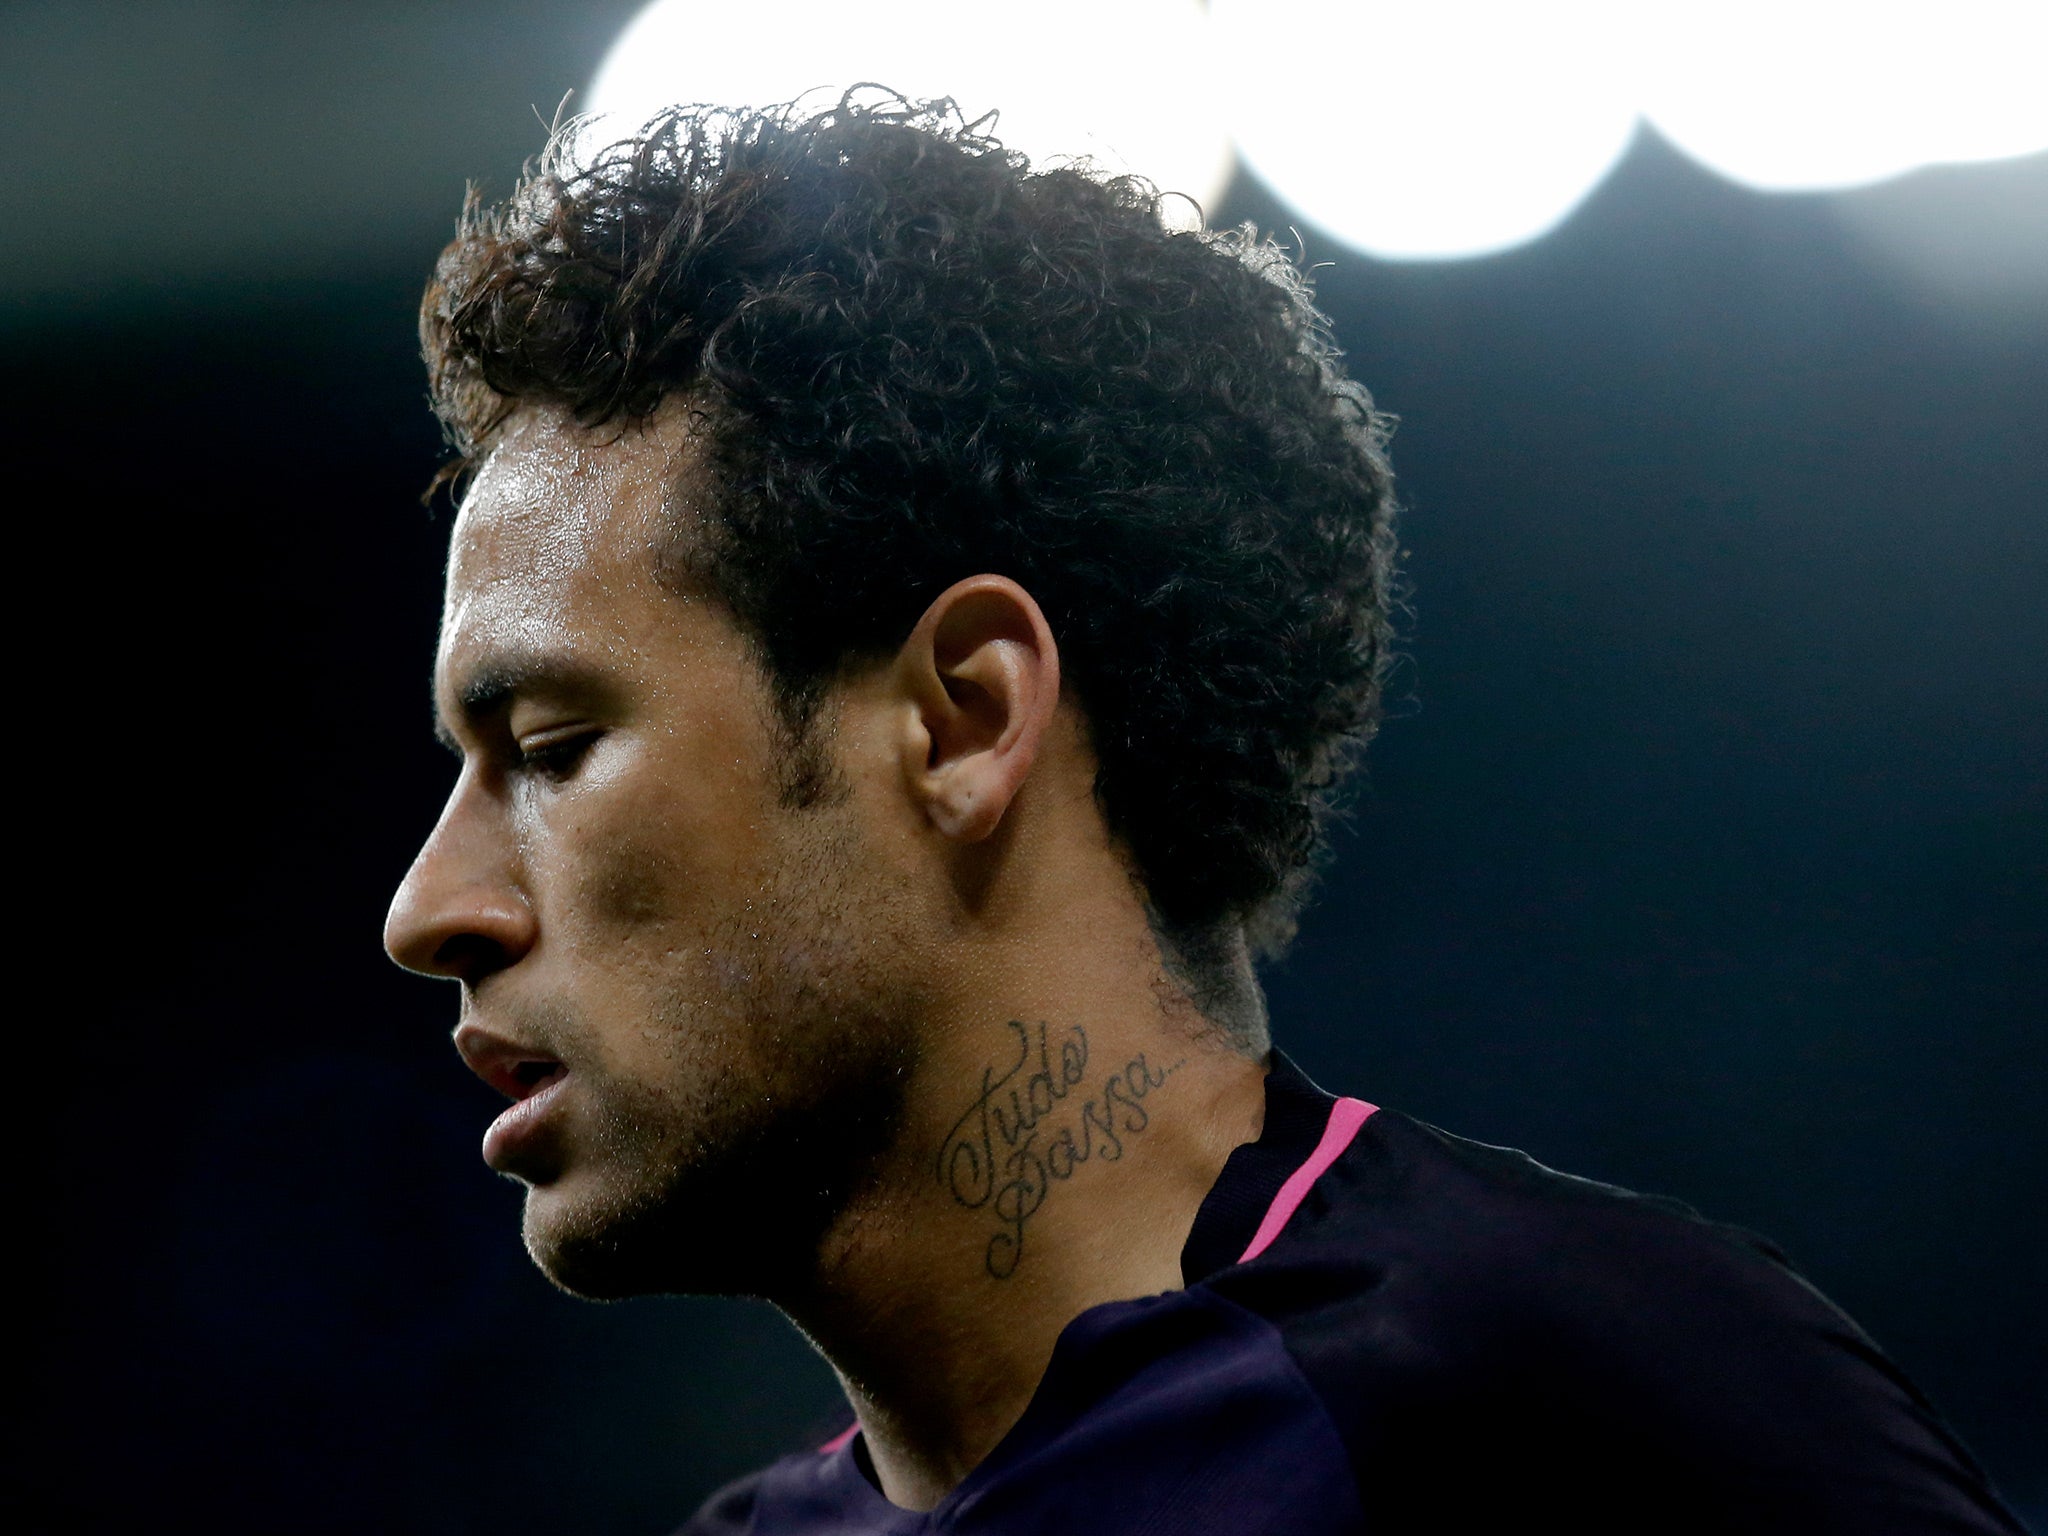 Neymar is unlikely to spend time in prison, even if found guilty and sentenced